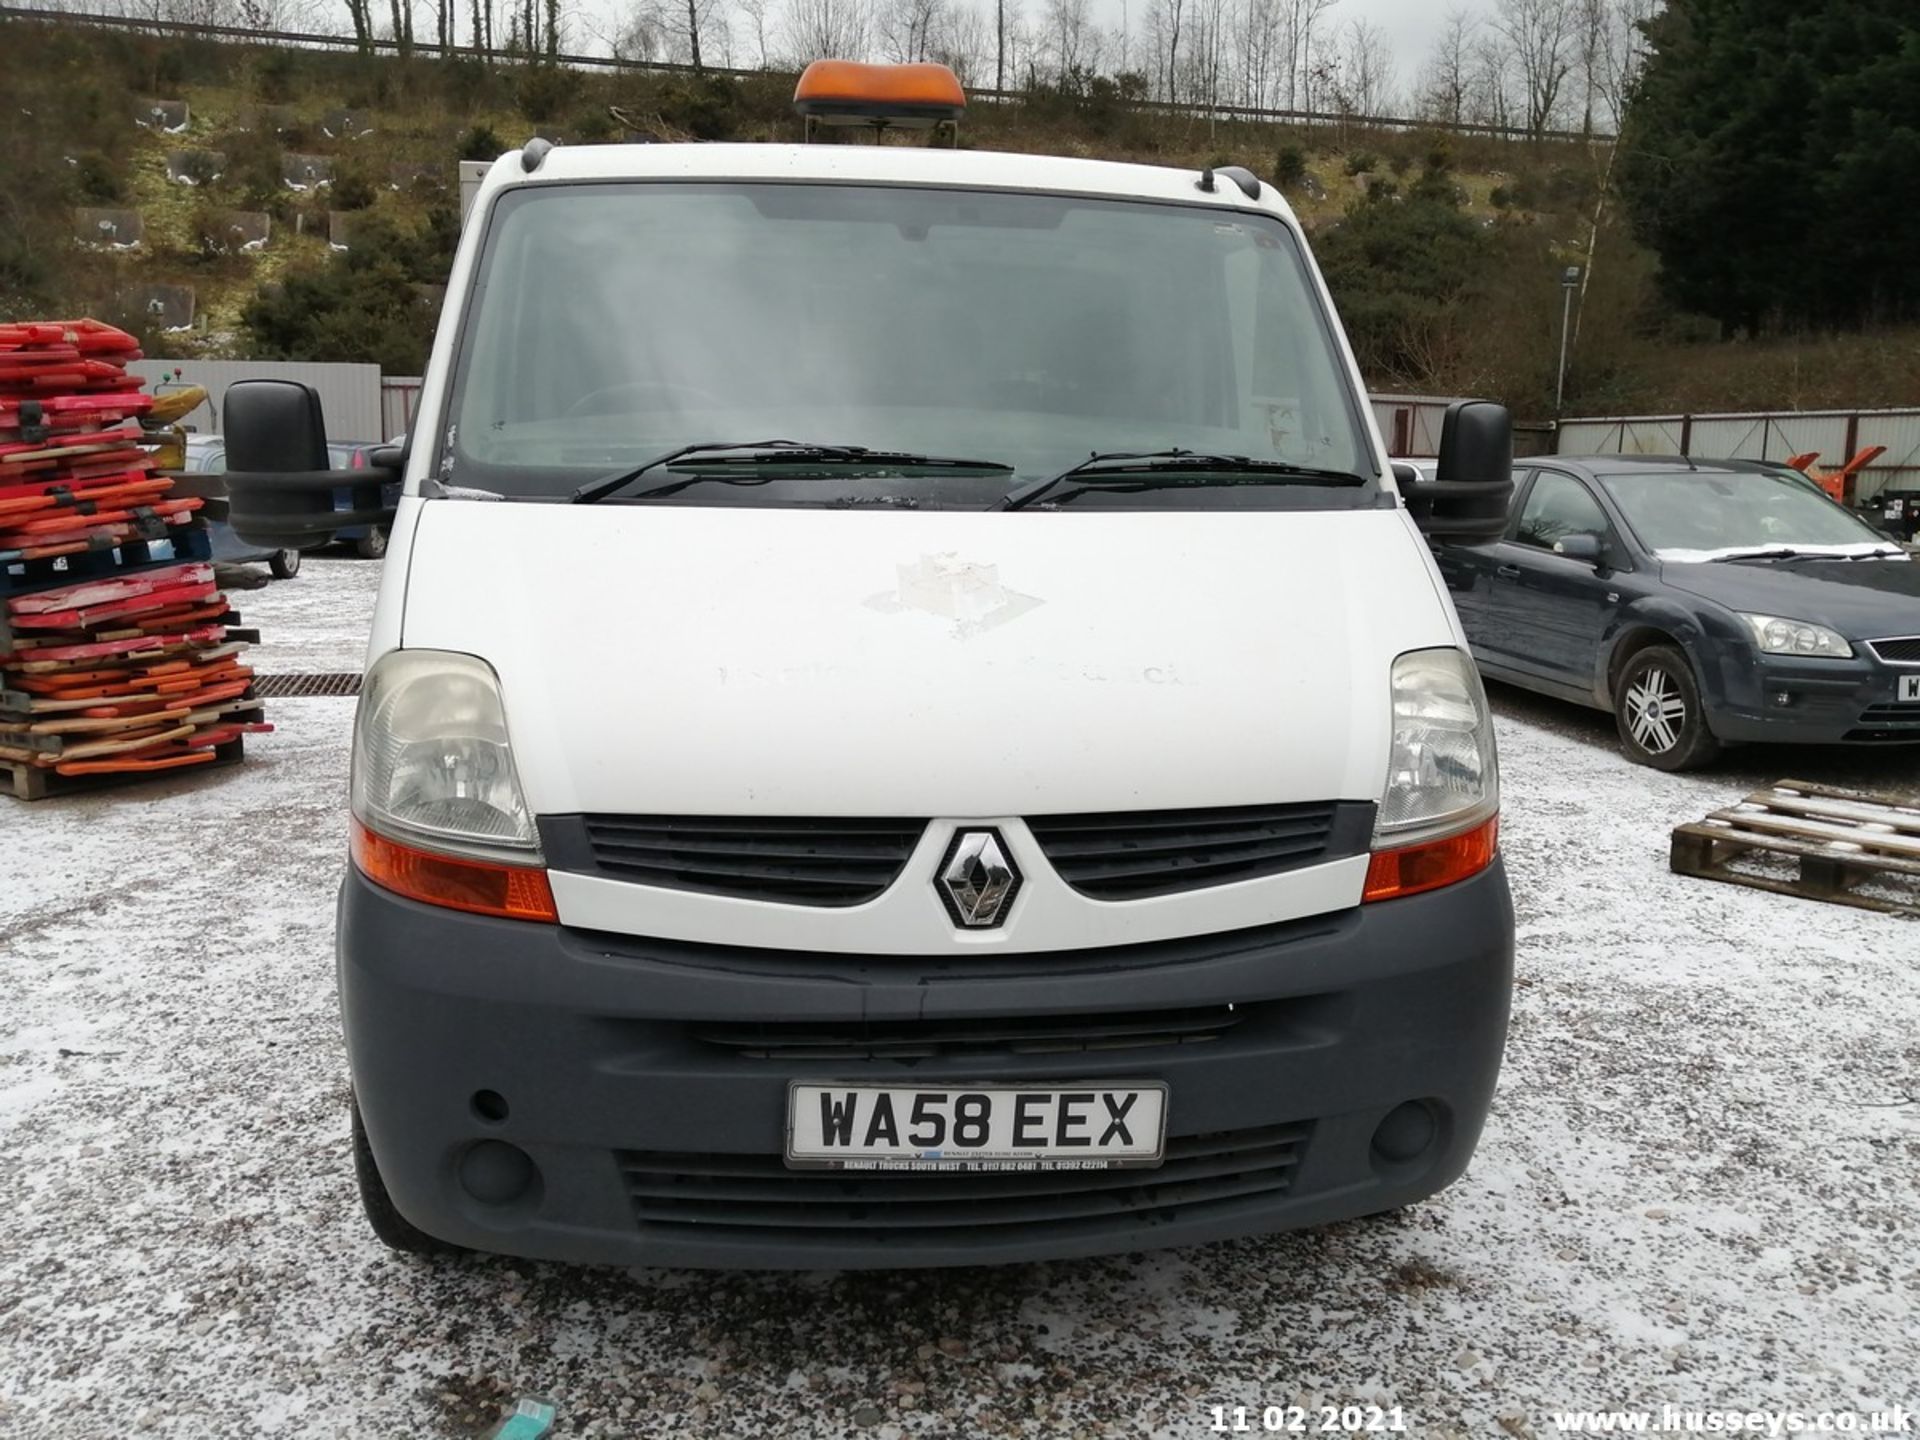 08/58 RENAULT MASTER ML35 DCI 100 - 2464cc 2dr Tipper (White, 48k) - Image 9 of 11